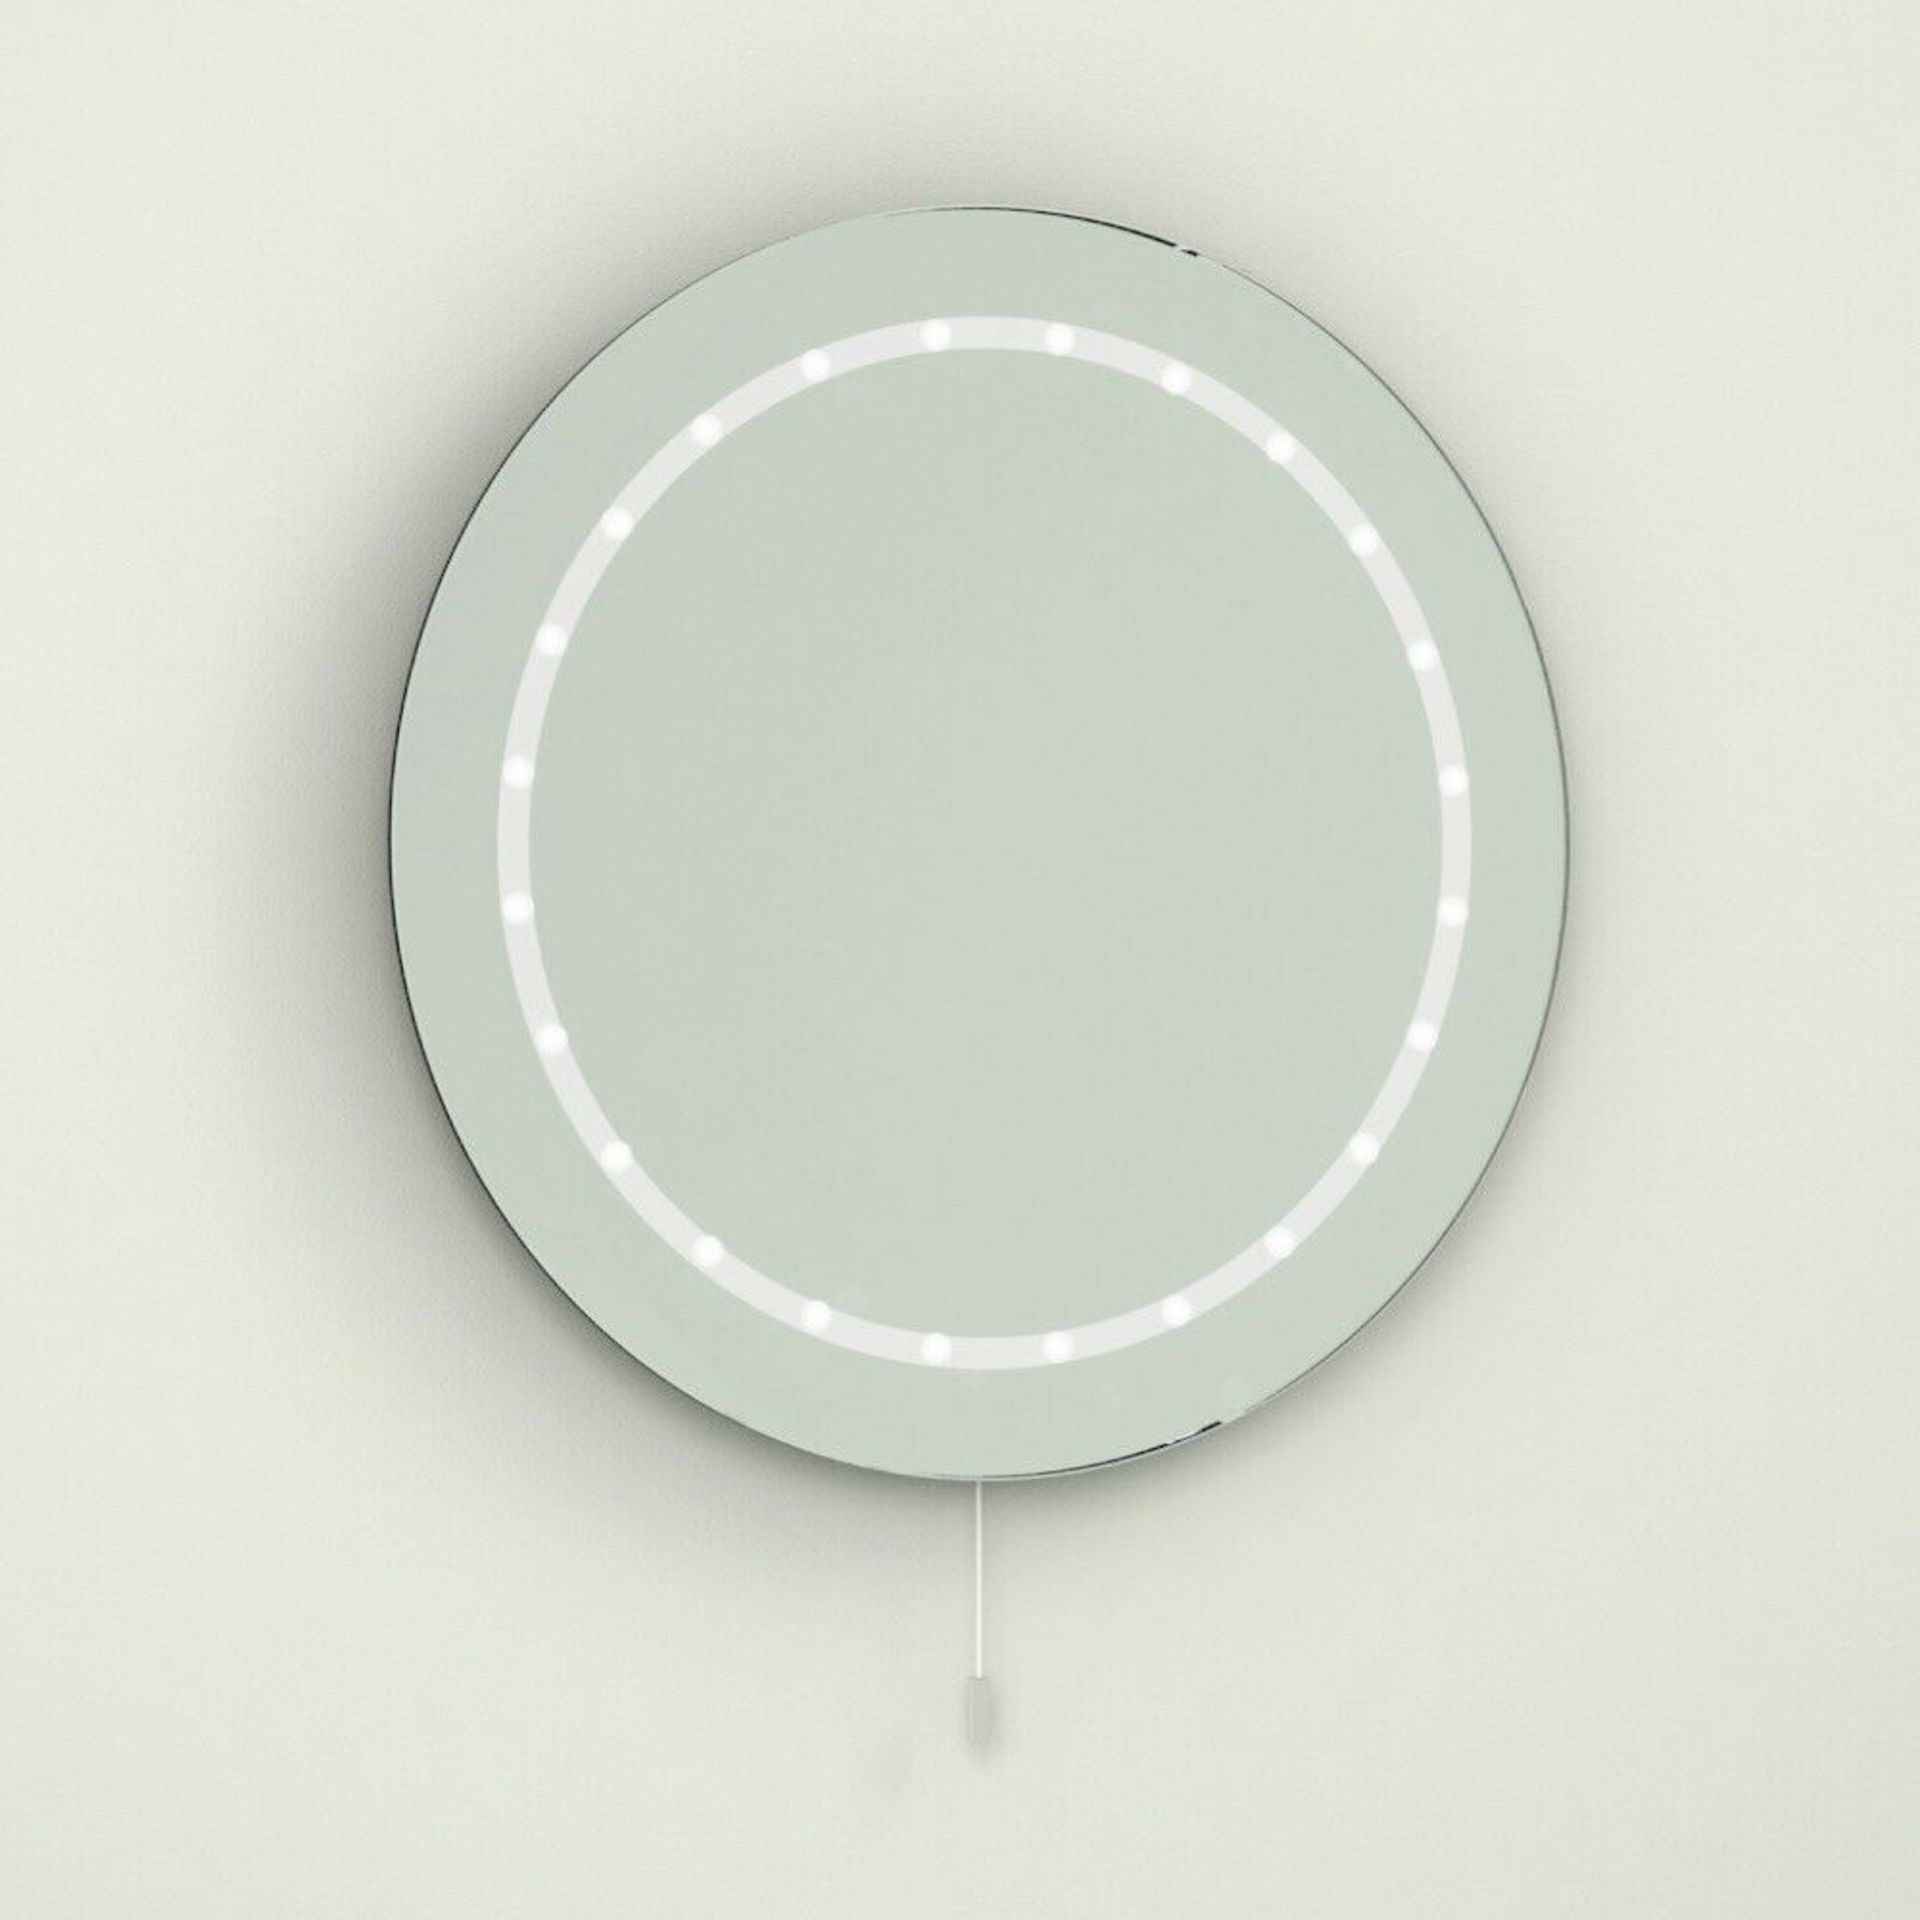 (KN117) 400mm Omega Round Battery Operated Illuminated Mirror. Battery Operated. Energy saving... - Image 2 of 2